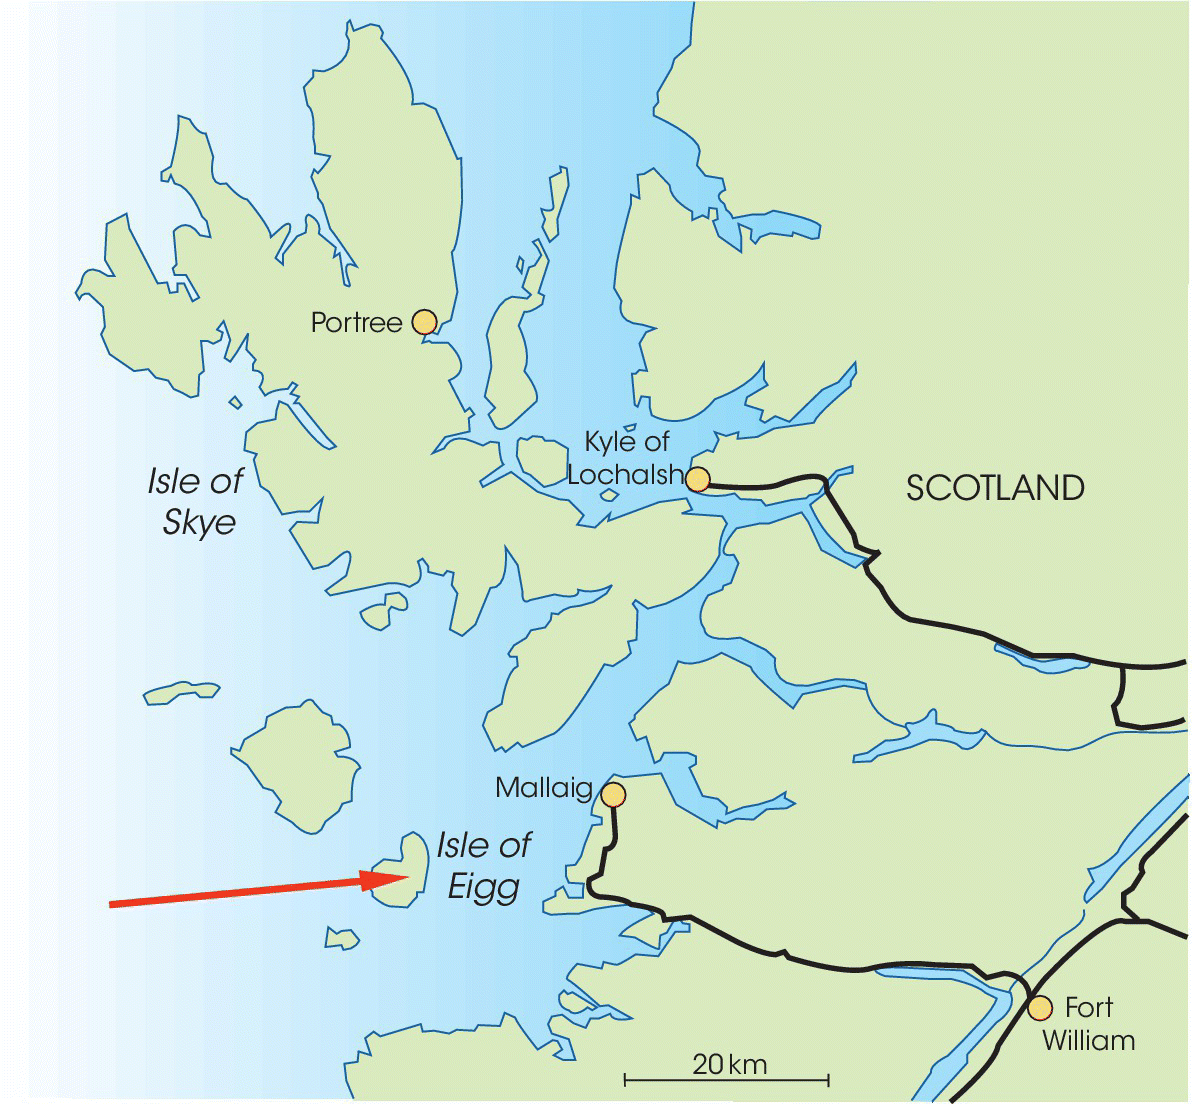 Map displaying the Isle of Eigg lying off the west coast of Scotland, with circles indicating the locations of Portree, Kyle of Lochalsh, Mallaig, and Fort William.